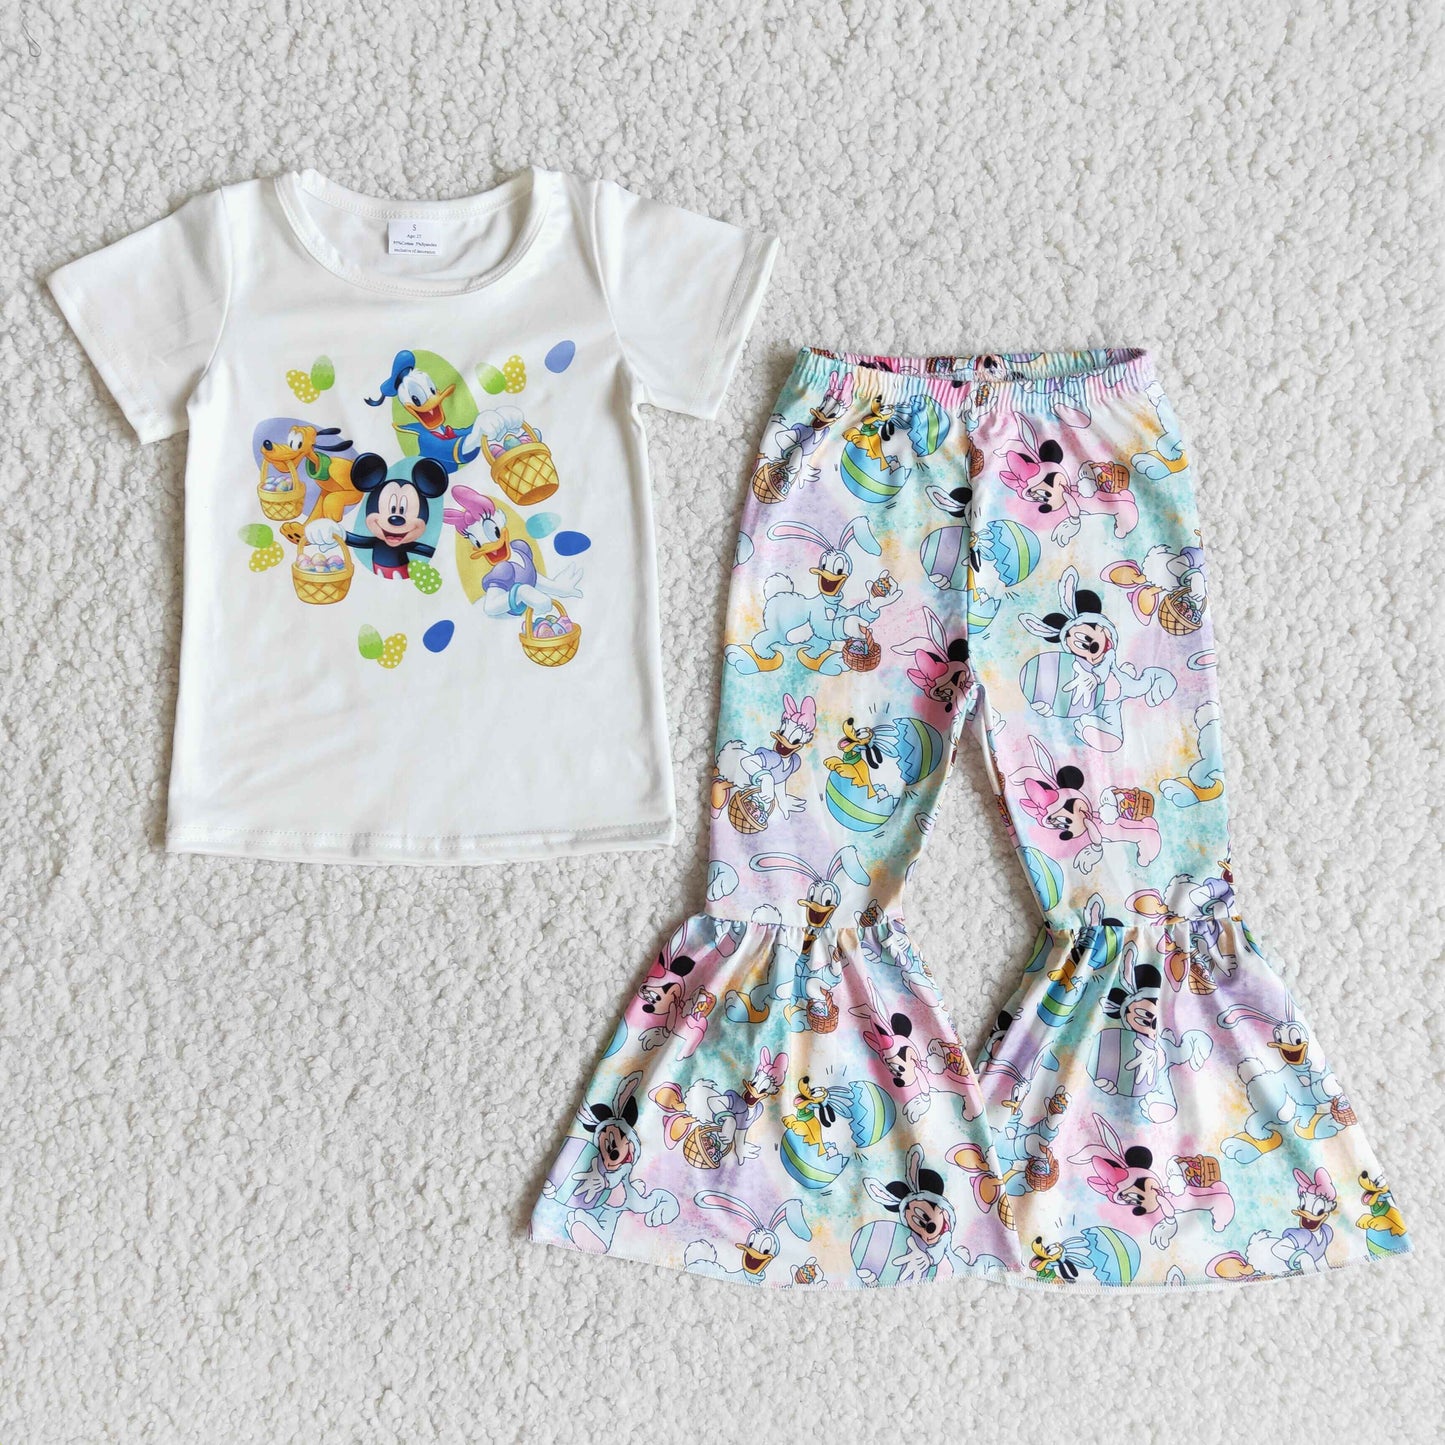 Girls cartoon Easter outfit